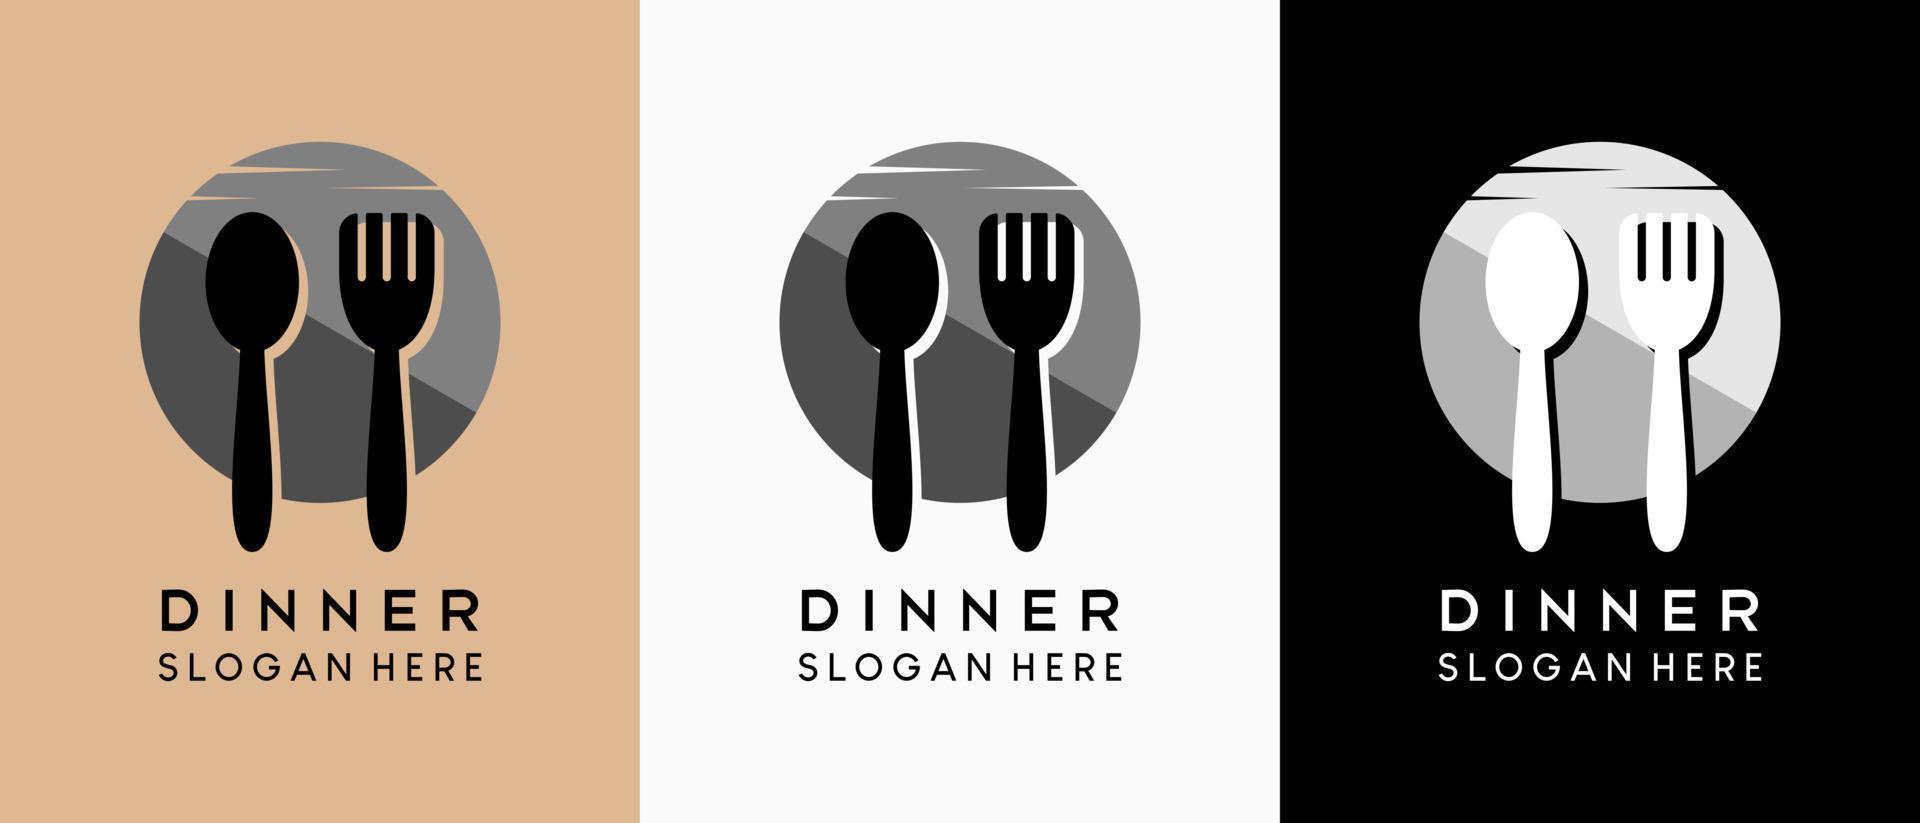 Dinner logo design with a creative concept, perfect for a dinner restaurant business. Silhouette of spoon and fork in moon icon vector